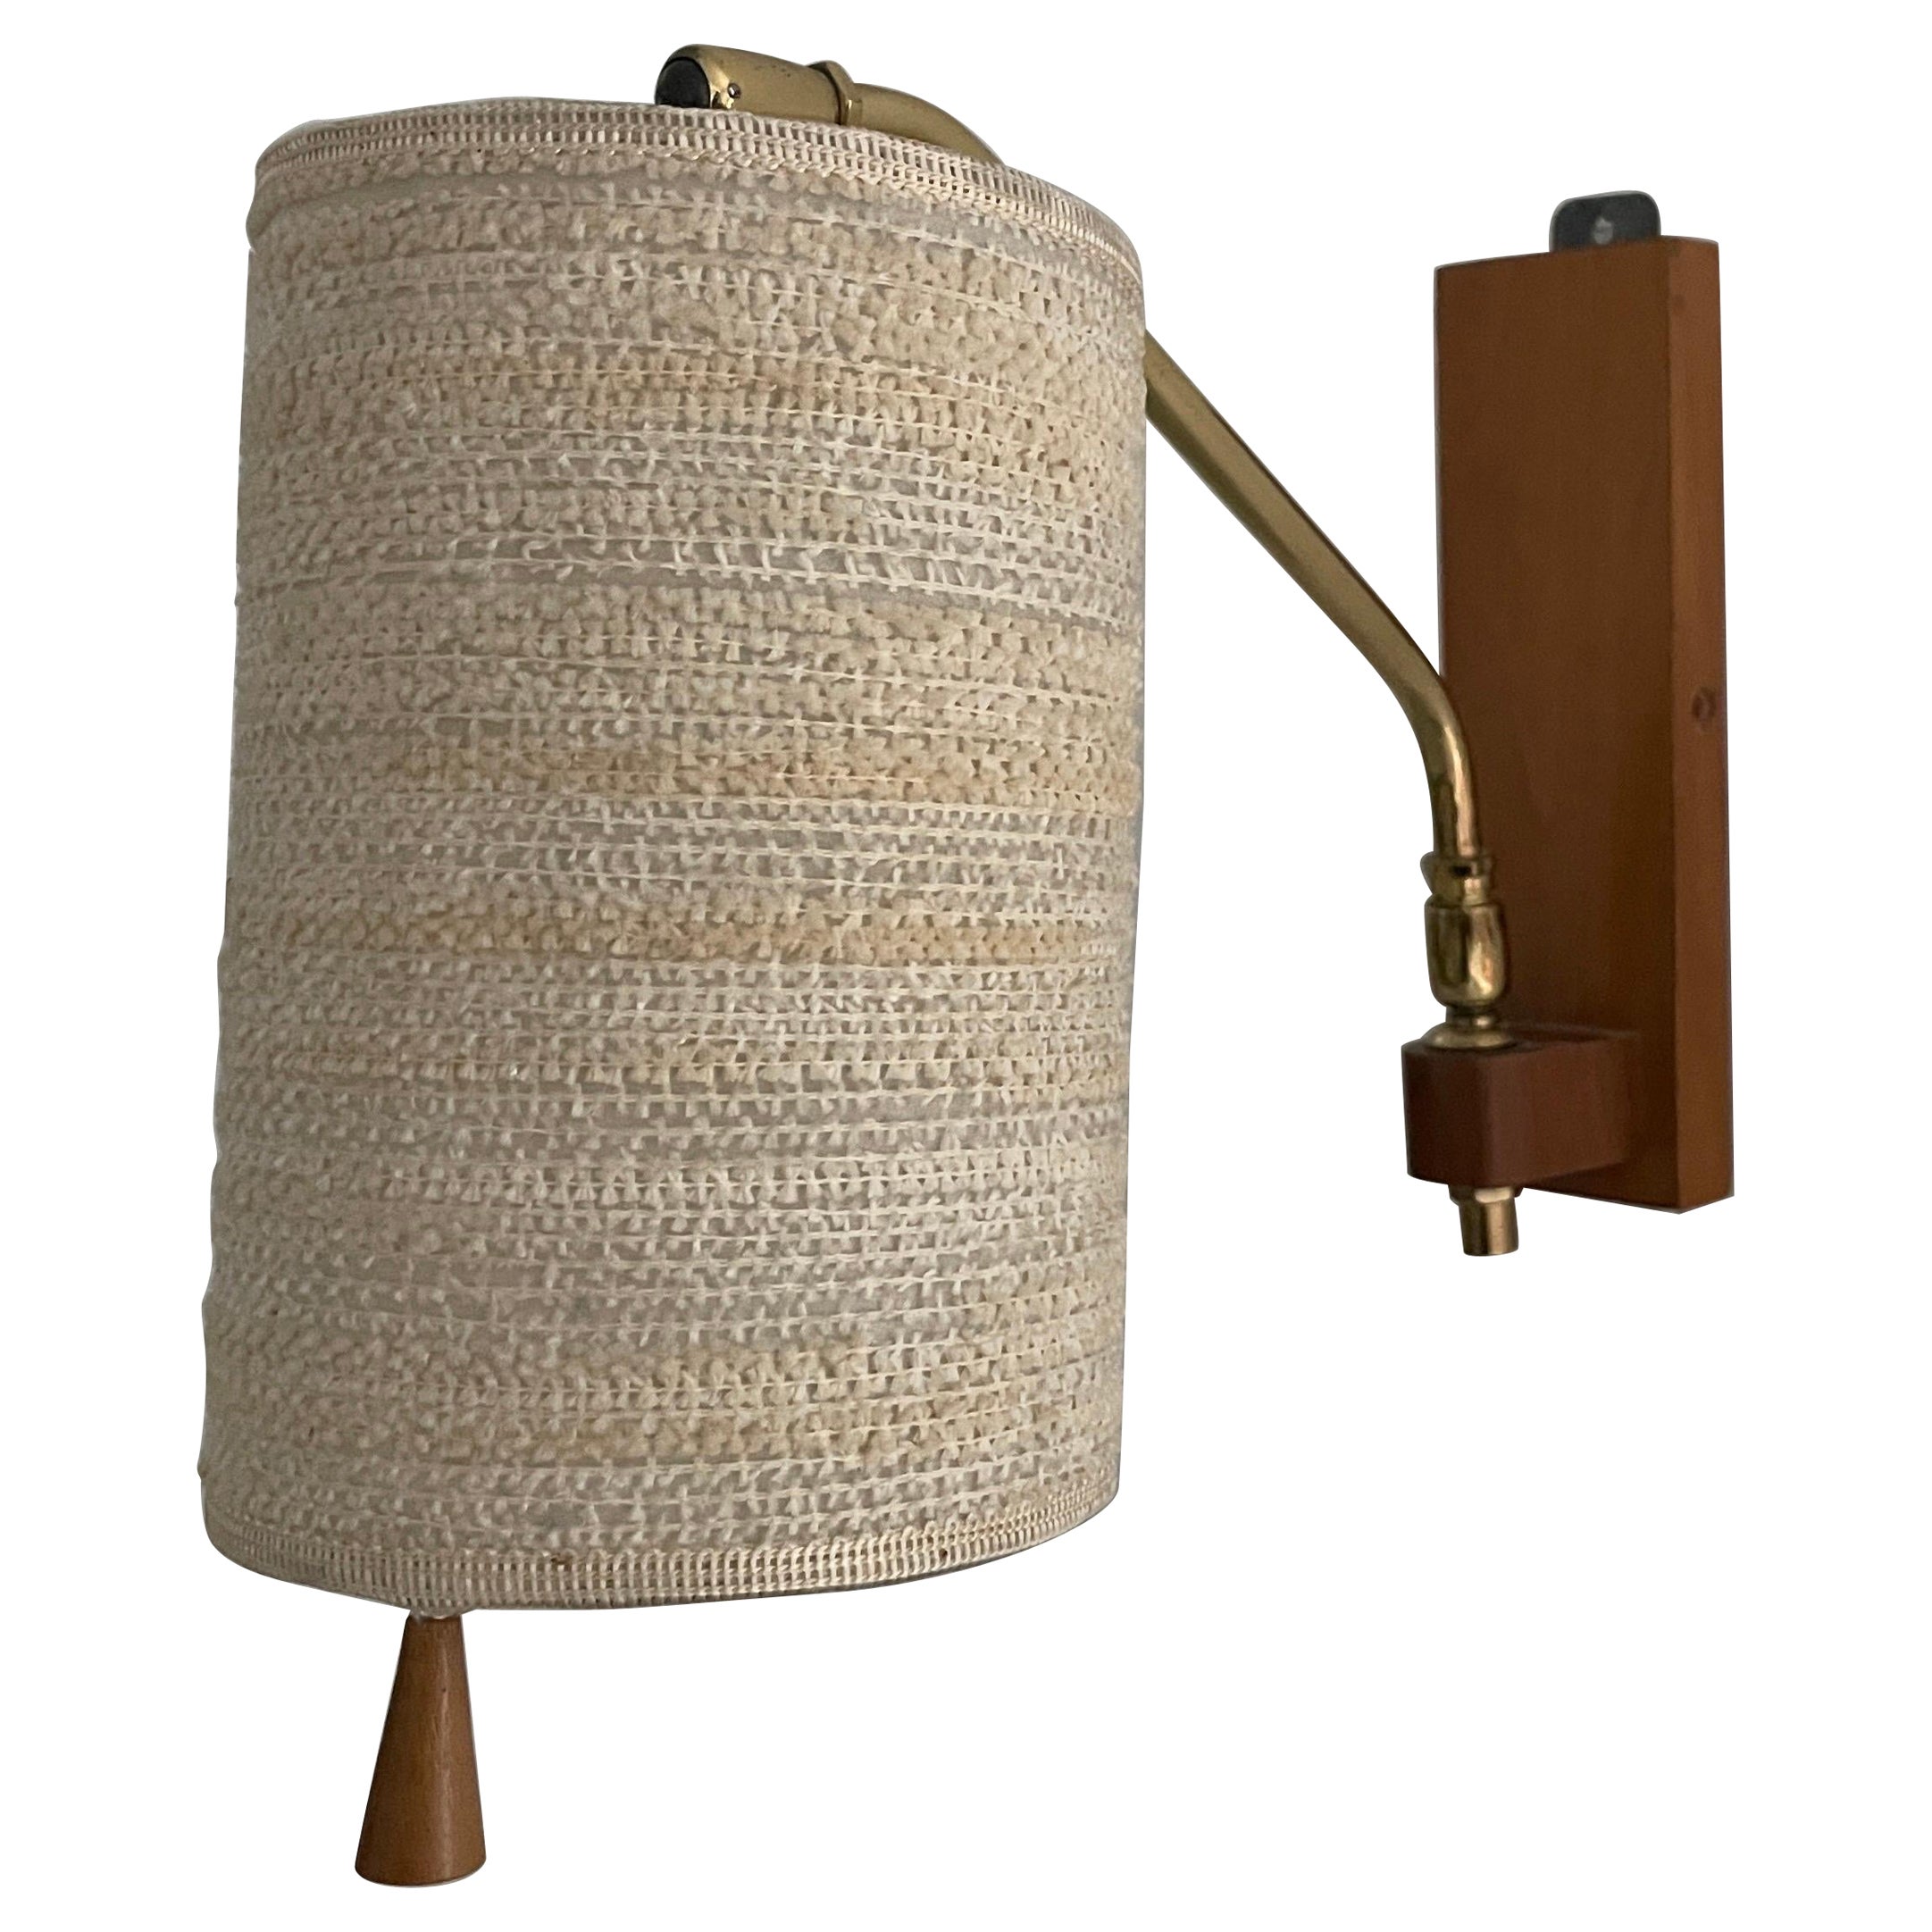 Fabric Shade and Wood Wall Lamp with Brass Neck, 1960s, Germany For Sale